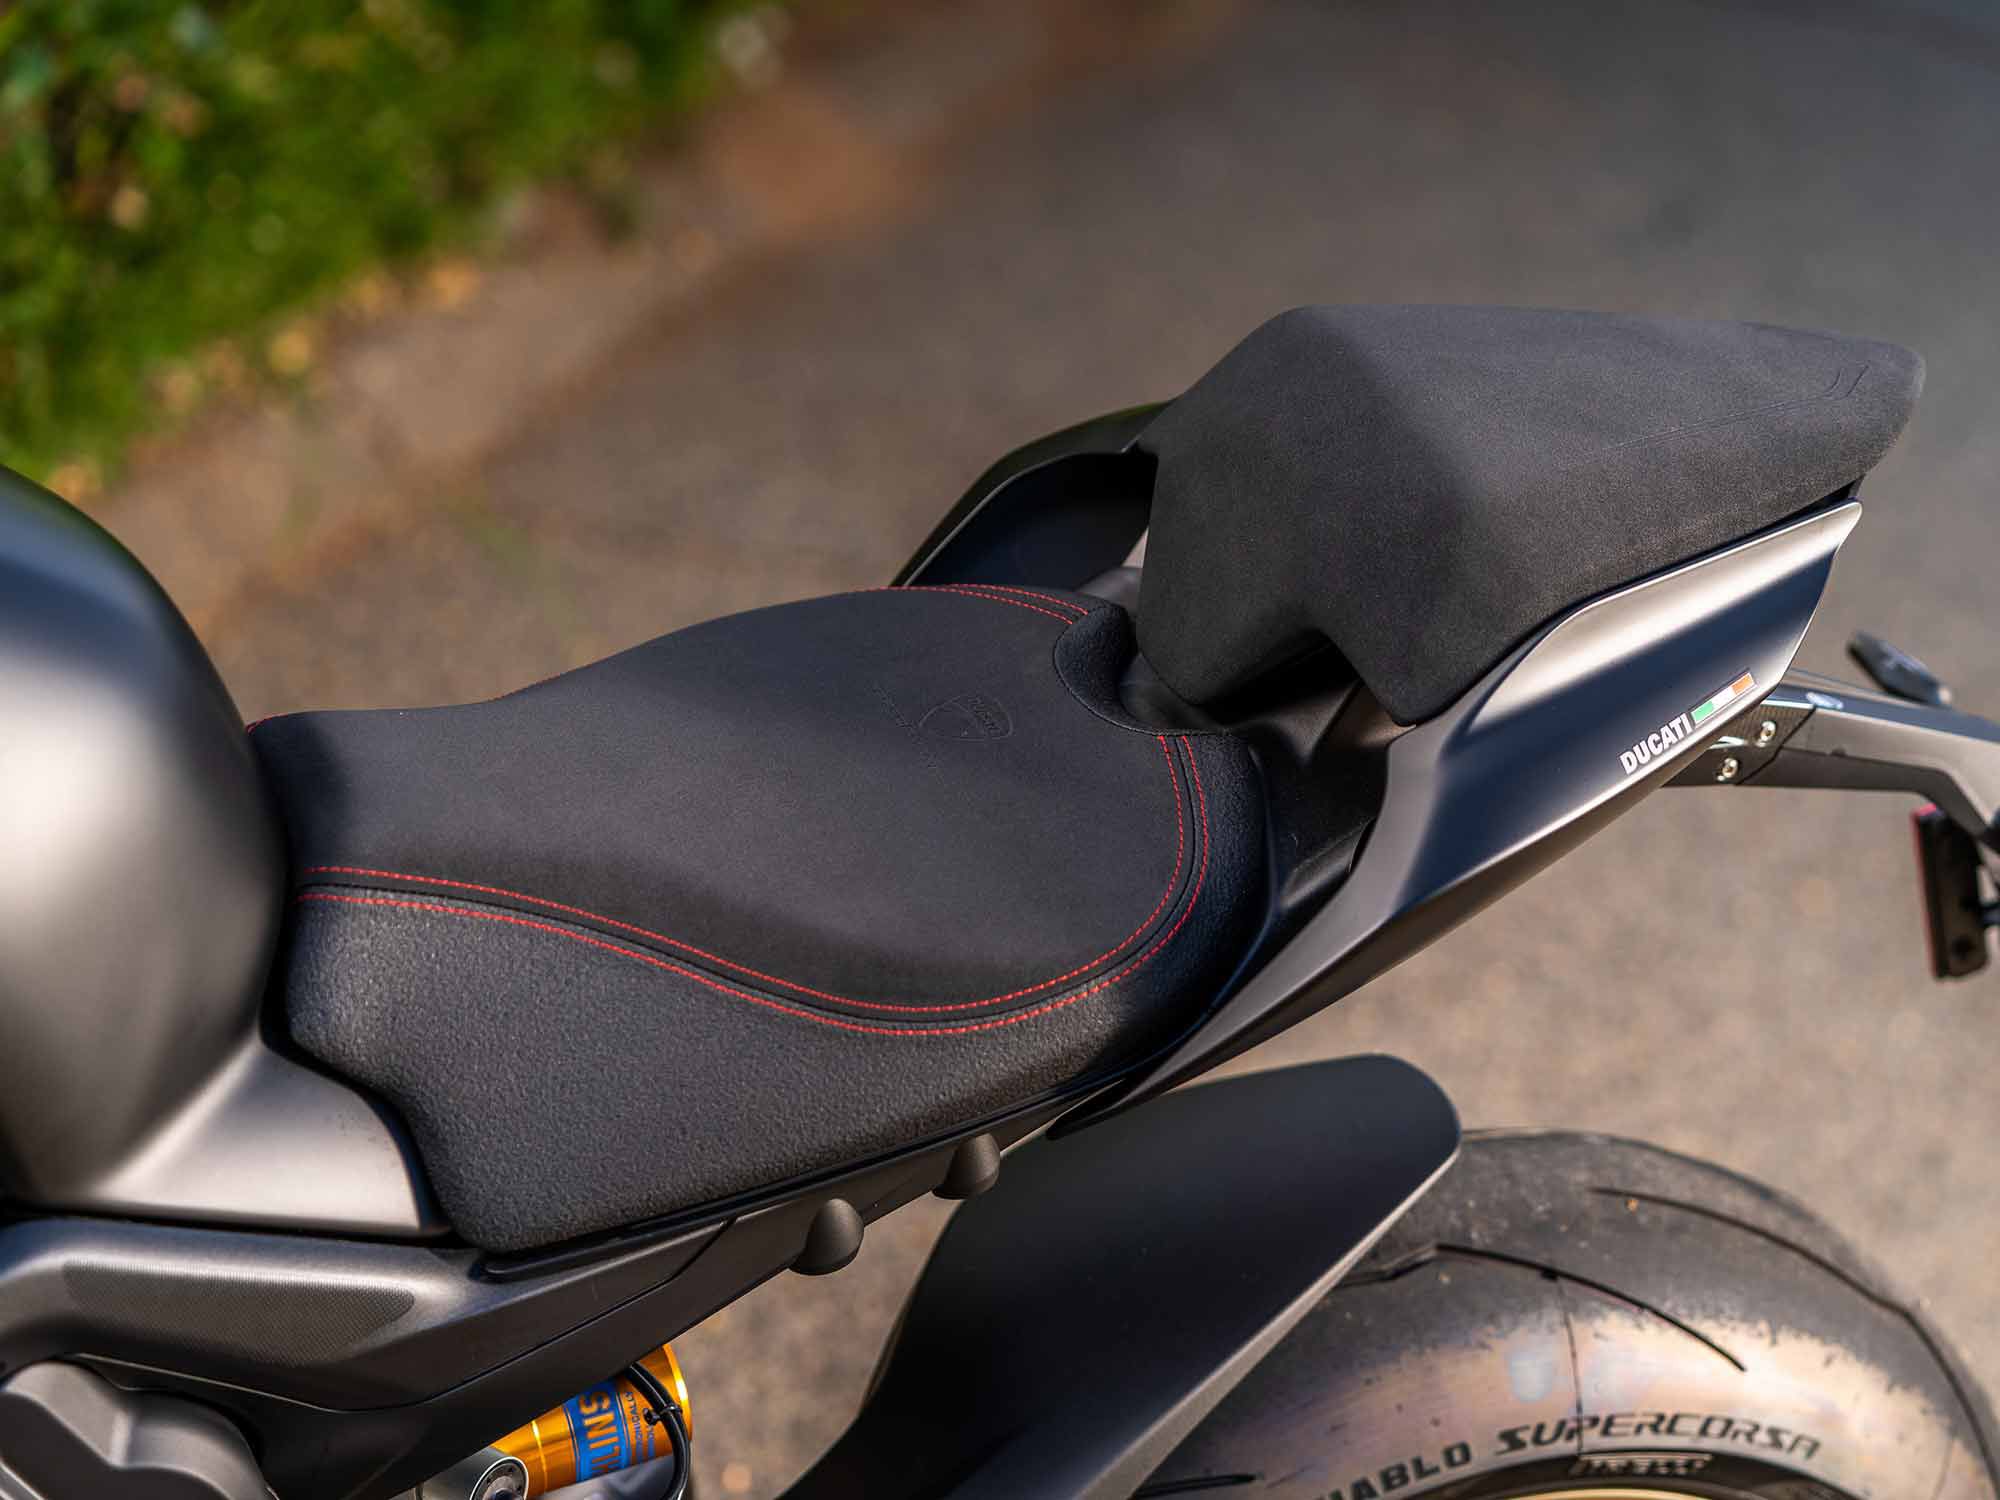 The accessory racing seat offers a surprising level of comfort. However, it’s a tad too grippy for our taste. Short riders beware: It raises the seat height to just over 34 inches.